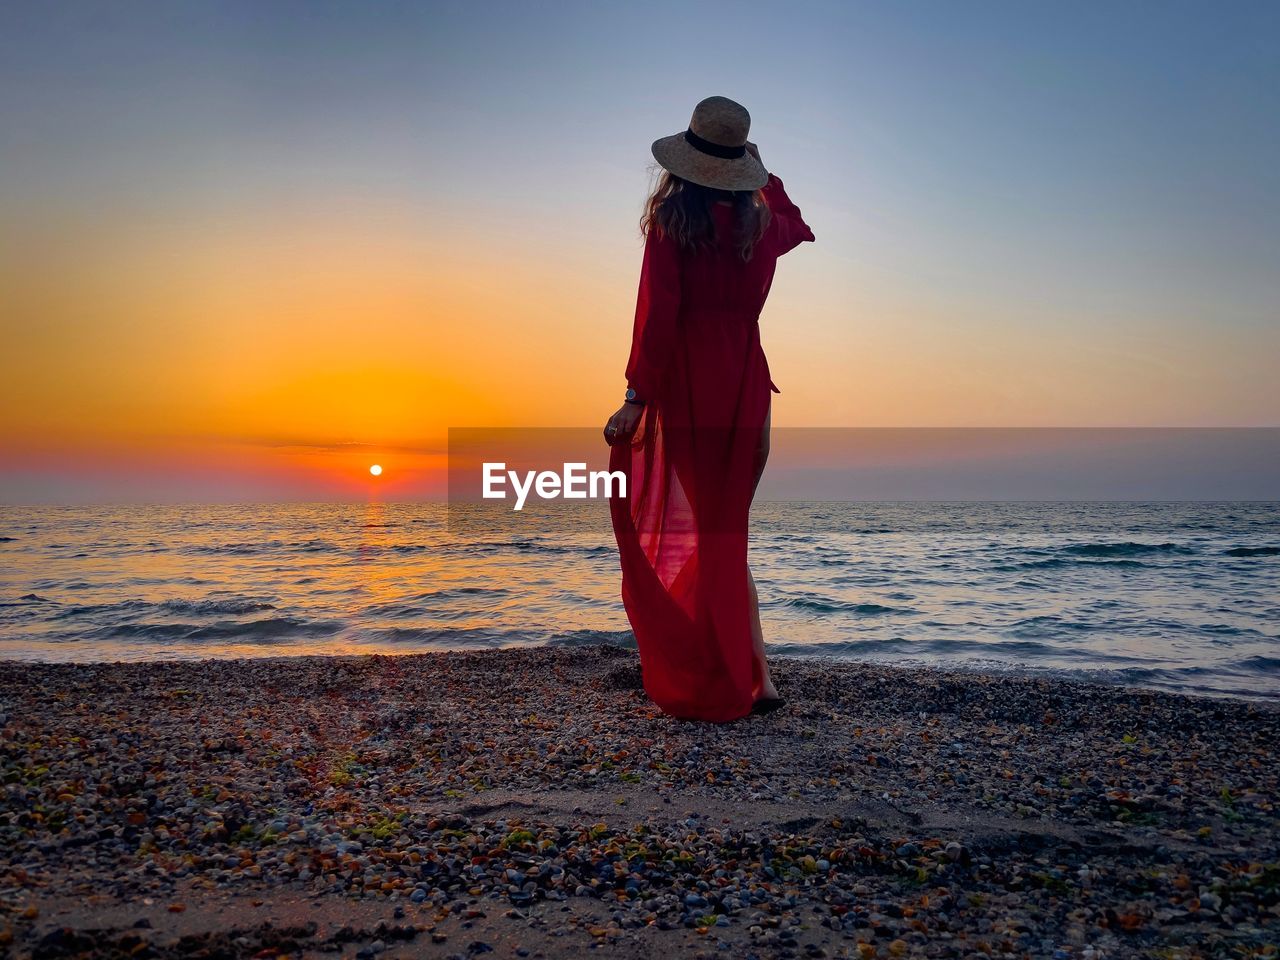 Rear view of woman wearing long red dress standing alone on the beach at sunrise